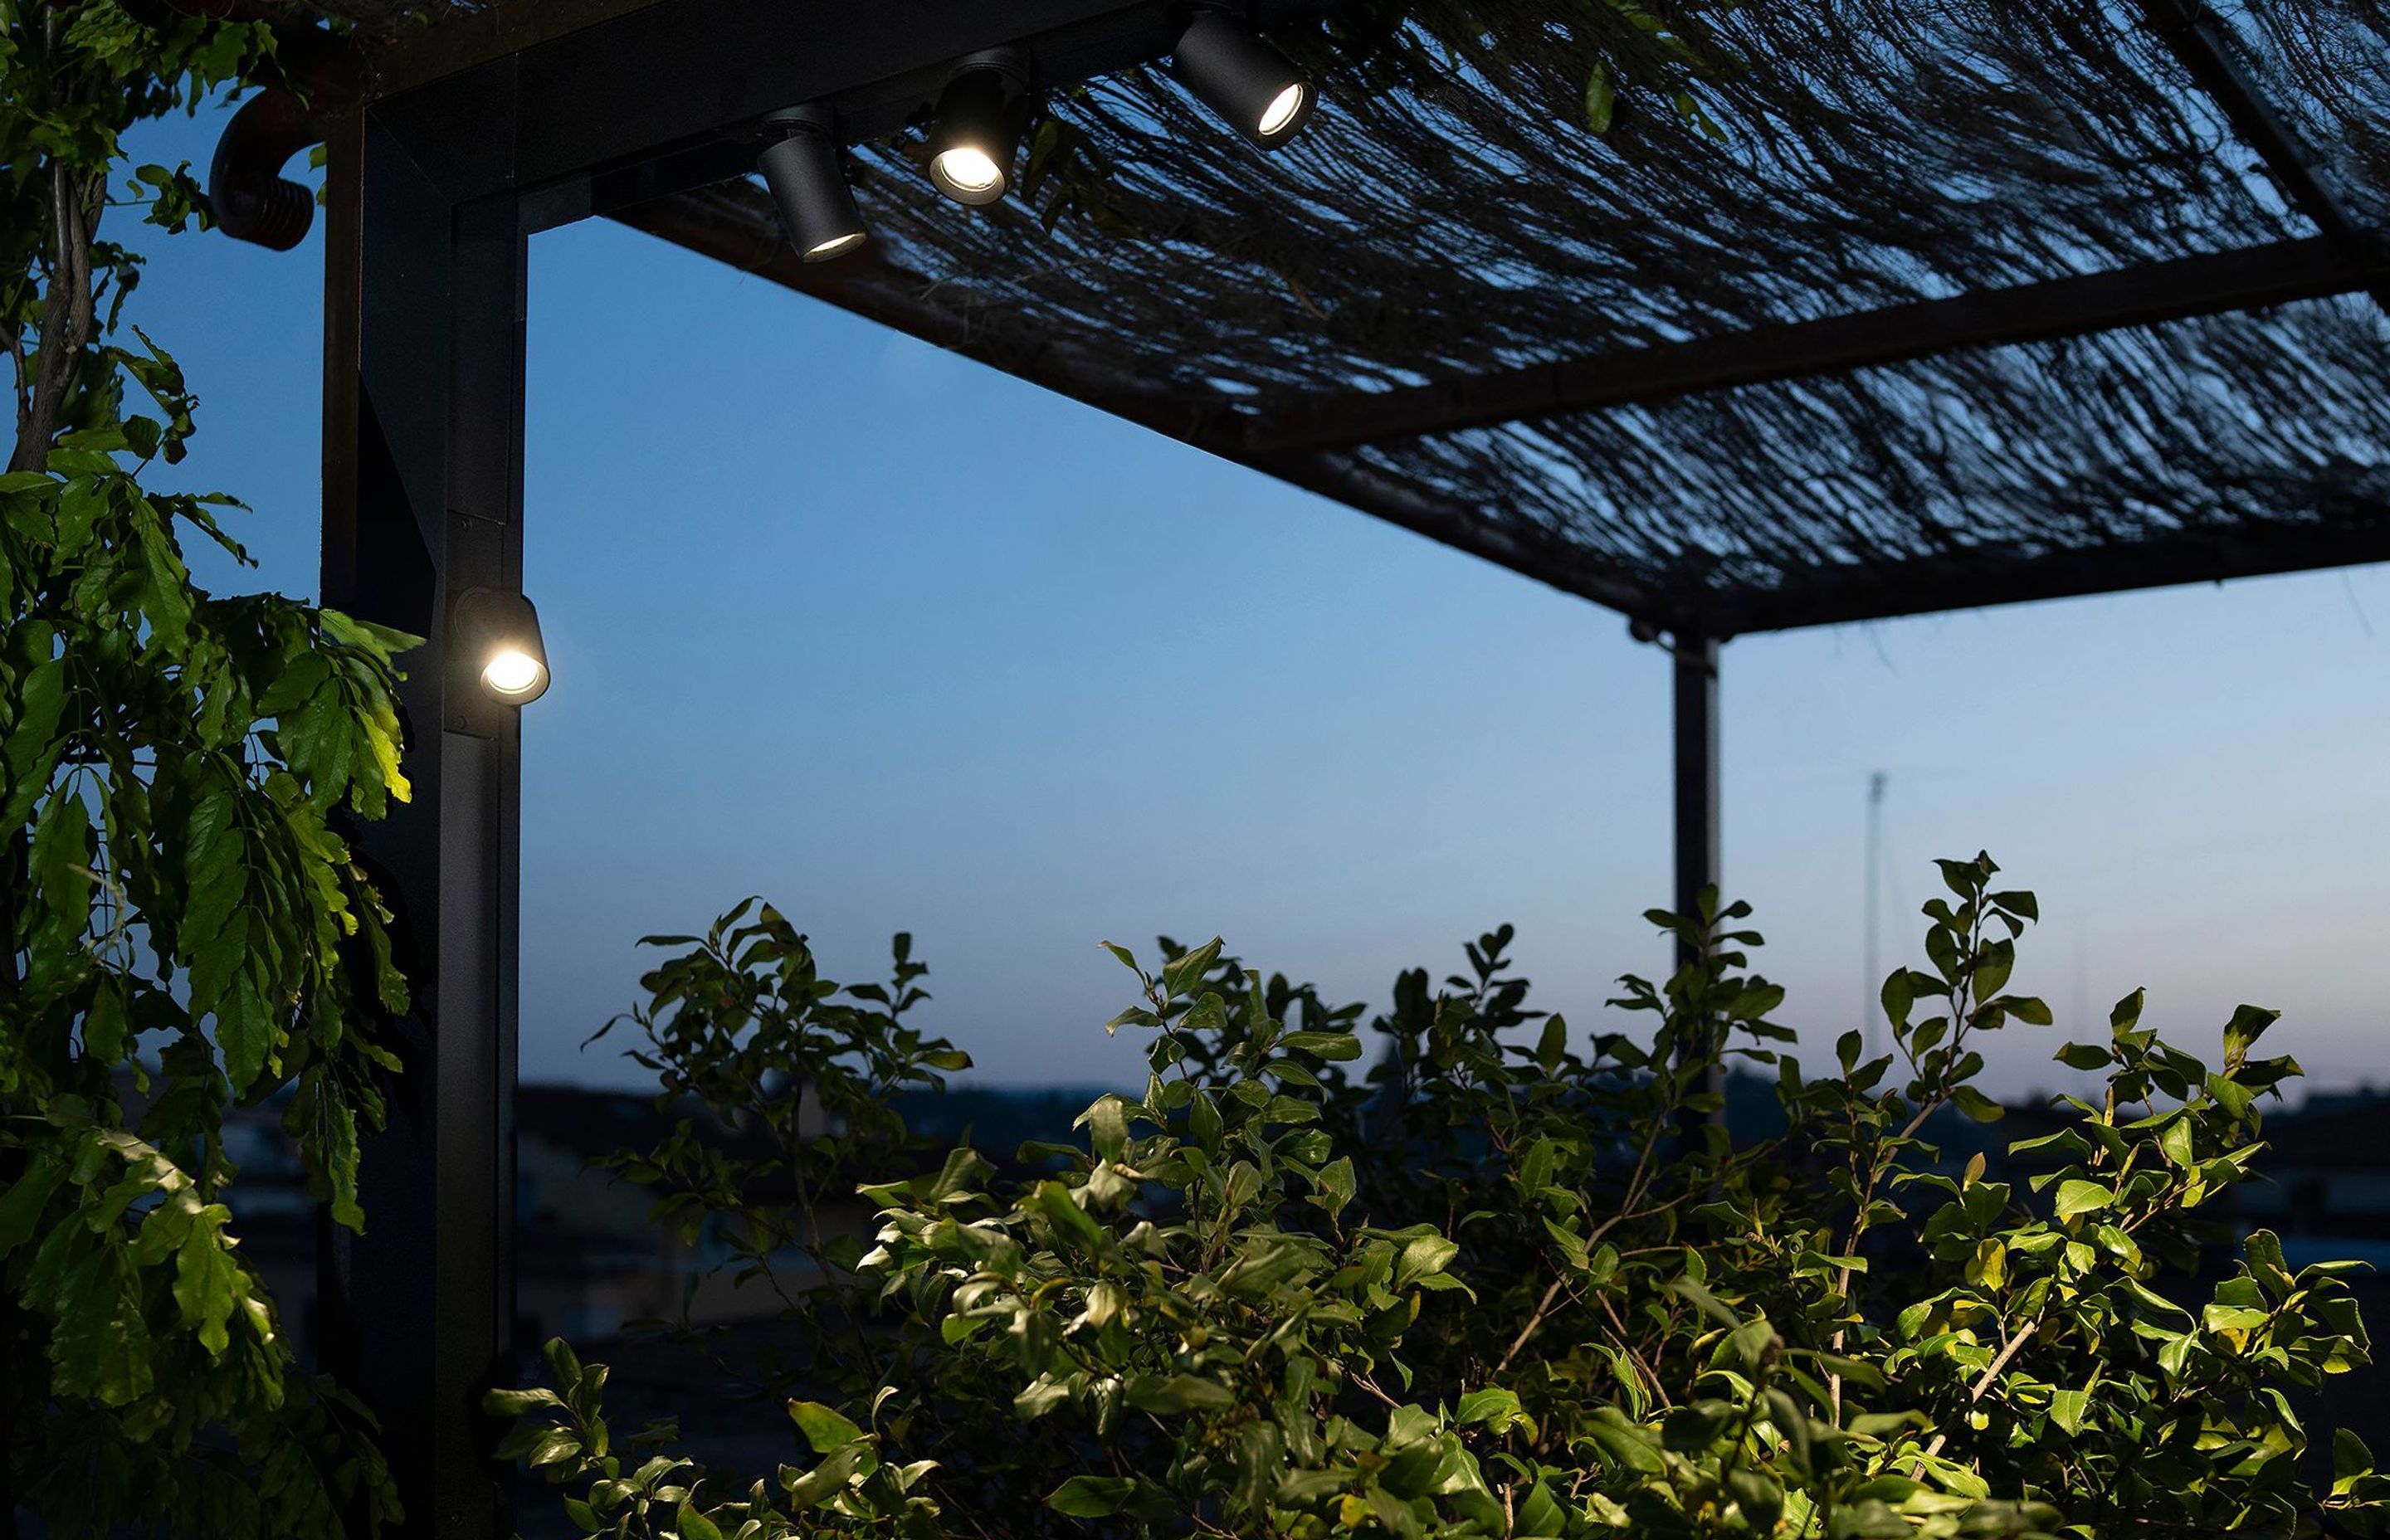 The seamless integration into the outdoor environment is a key feature of the IVY system.